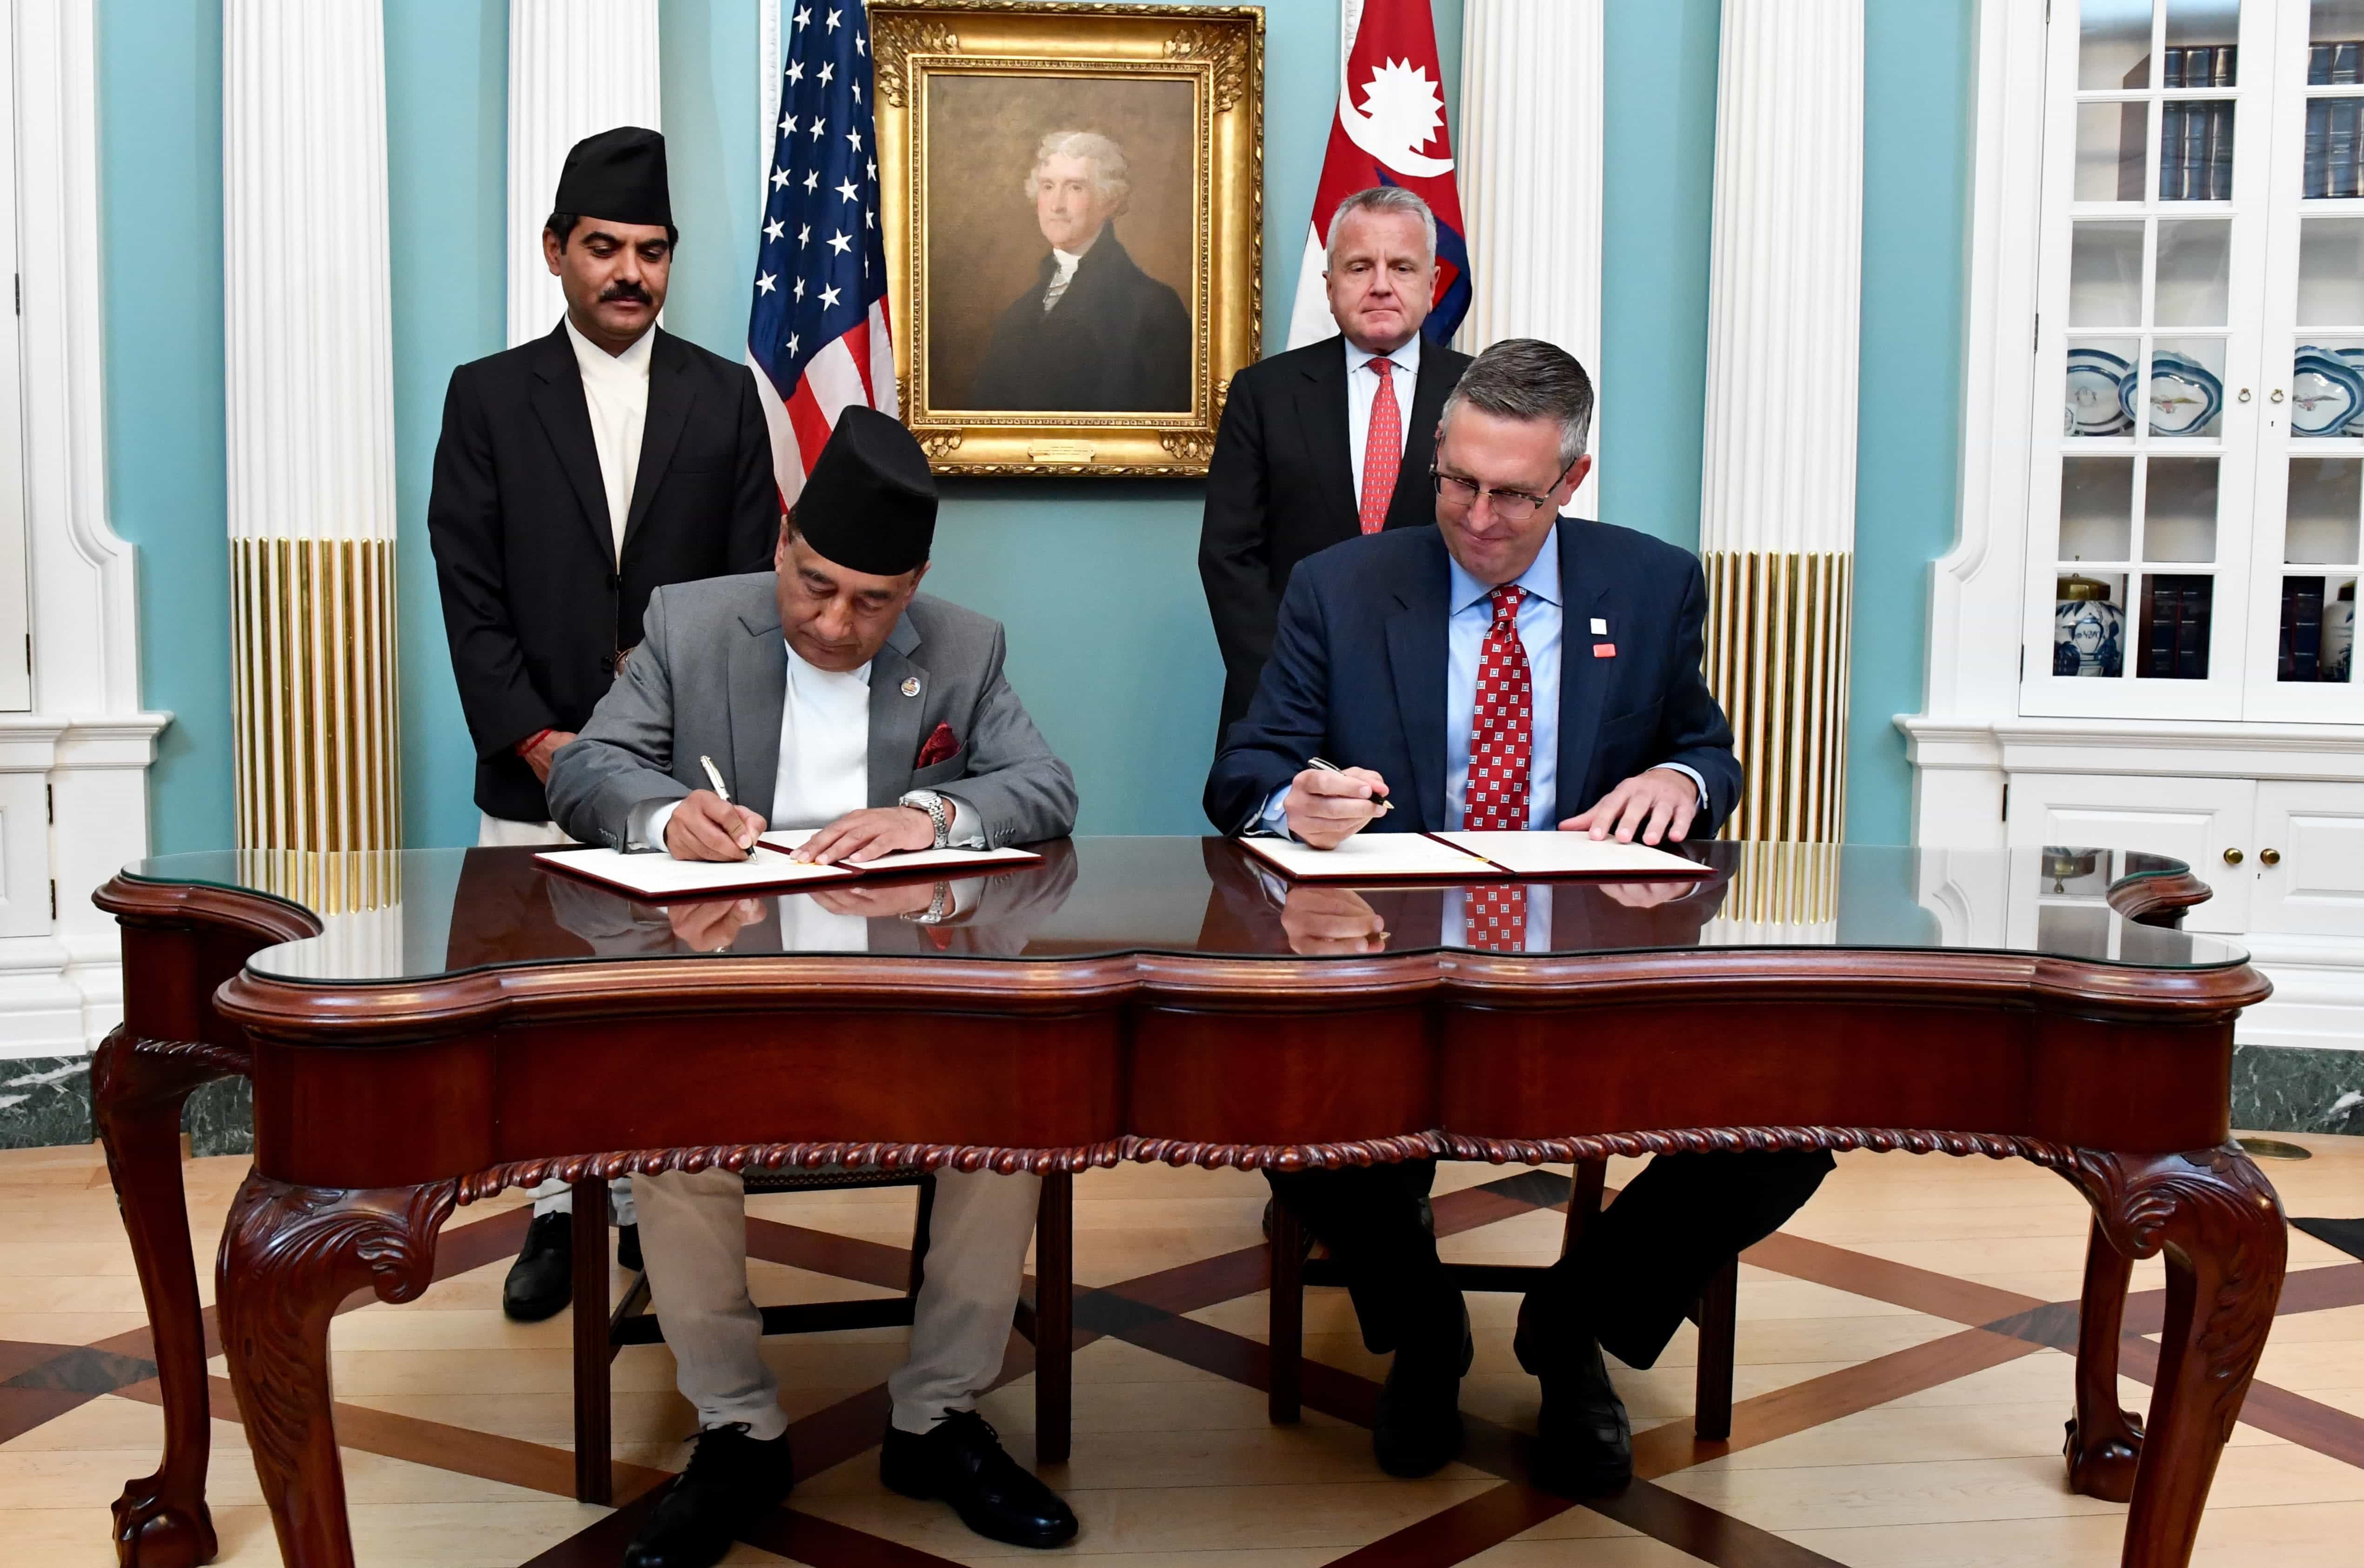 Deputy Secretary of State John Sullivan and MCC’s Acting CEO Jonathan Nash along with Nepal’s Minister of Finance Gyanendra Bahadur Karki at the U.S. Department of State signing the compact on September 14, 2017 | Source: State Department Photo/ Public Domain